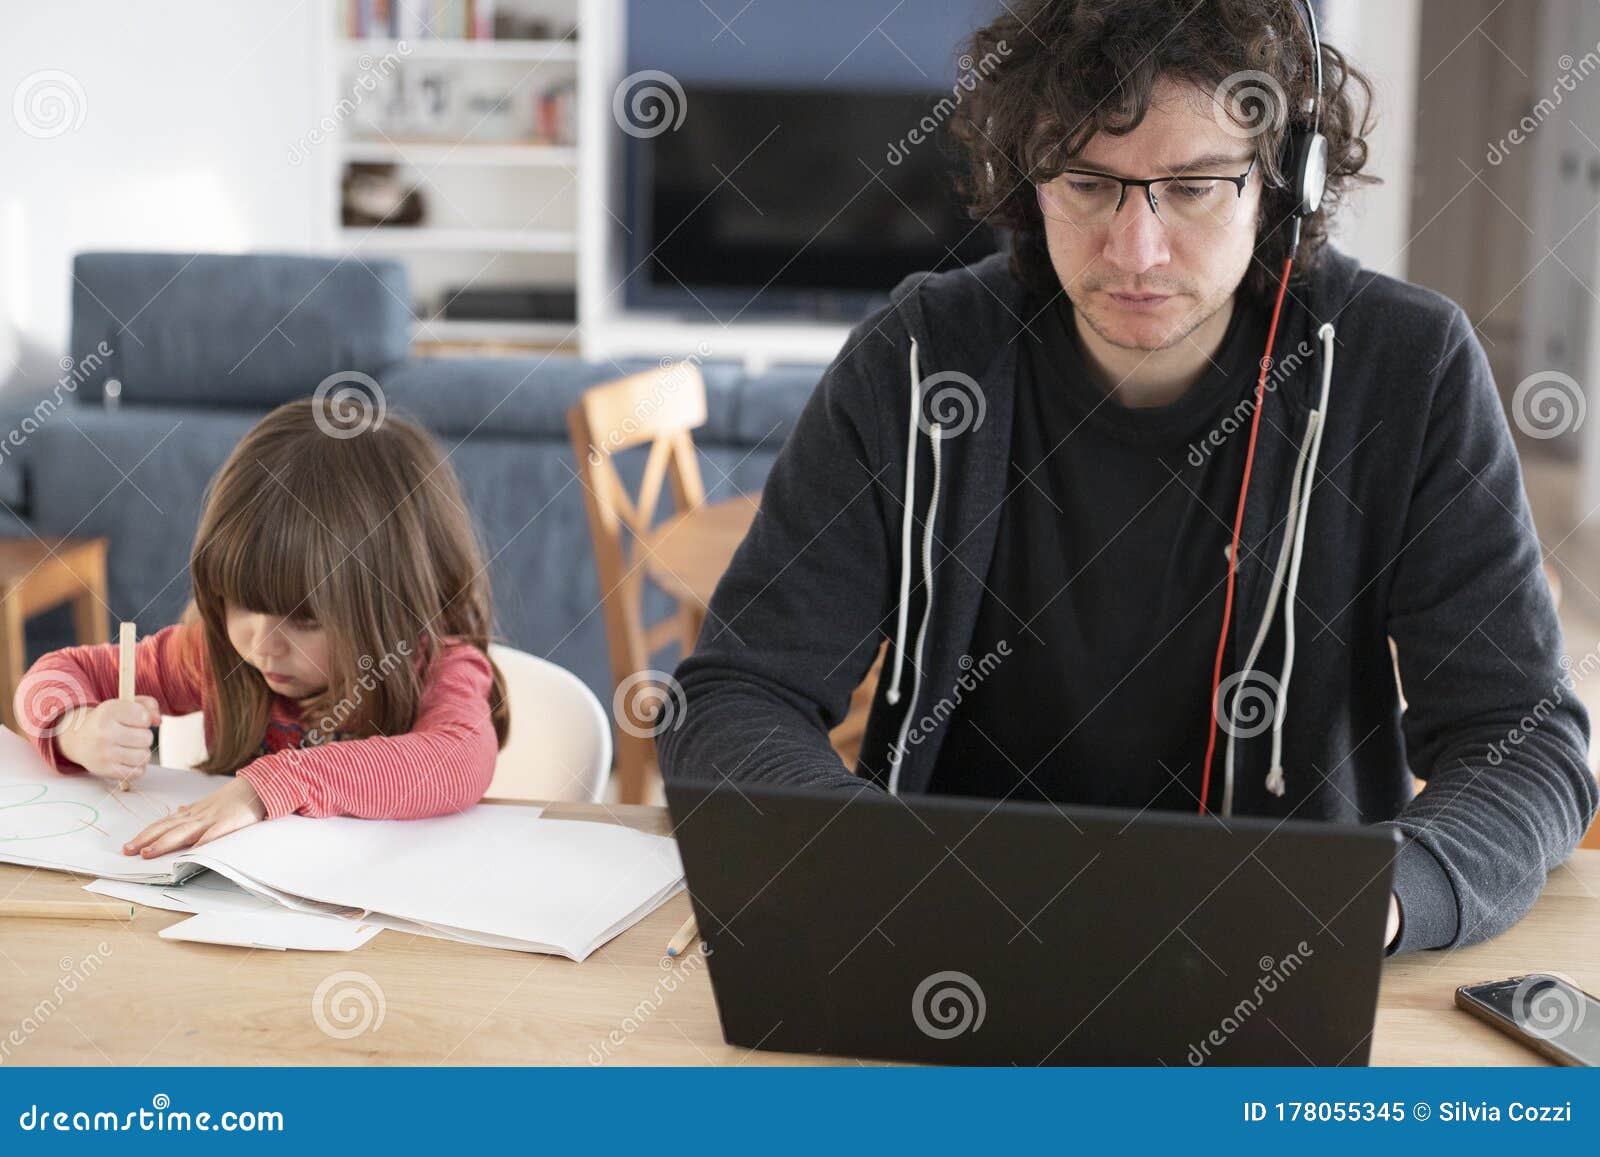 father working from home with little daughter during covid-19 lockdown. front view